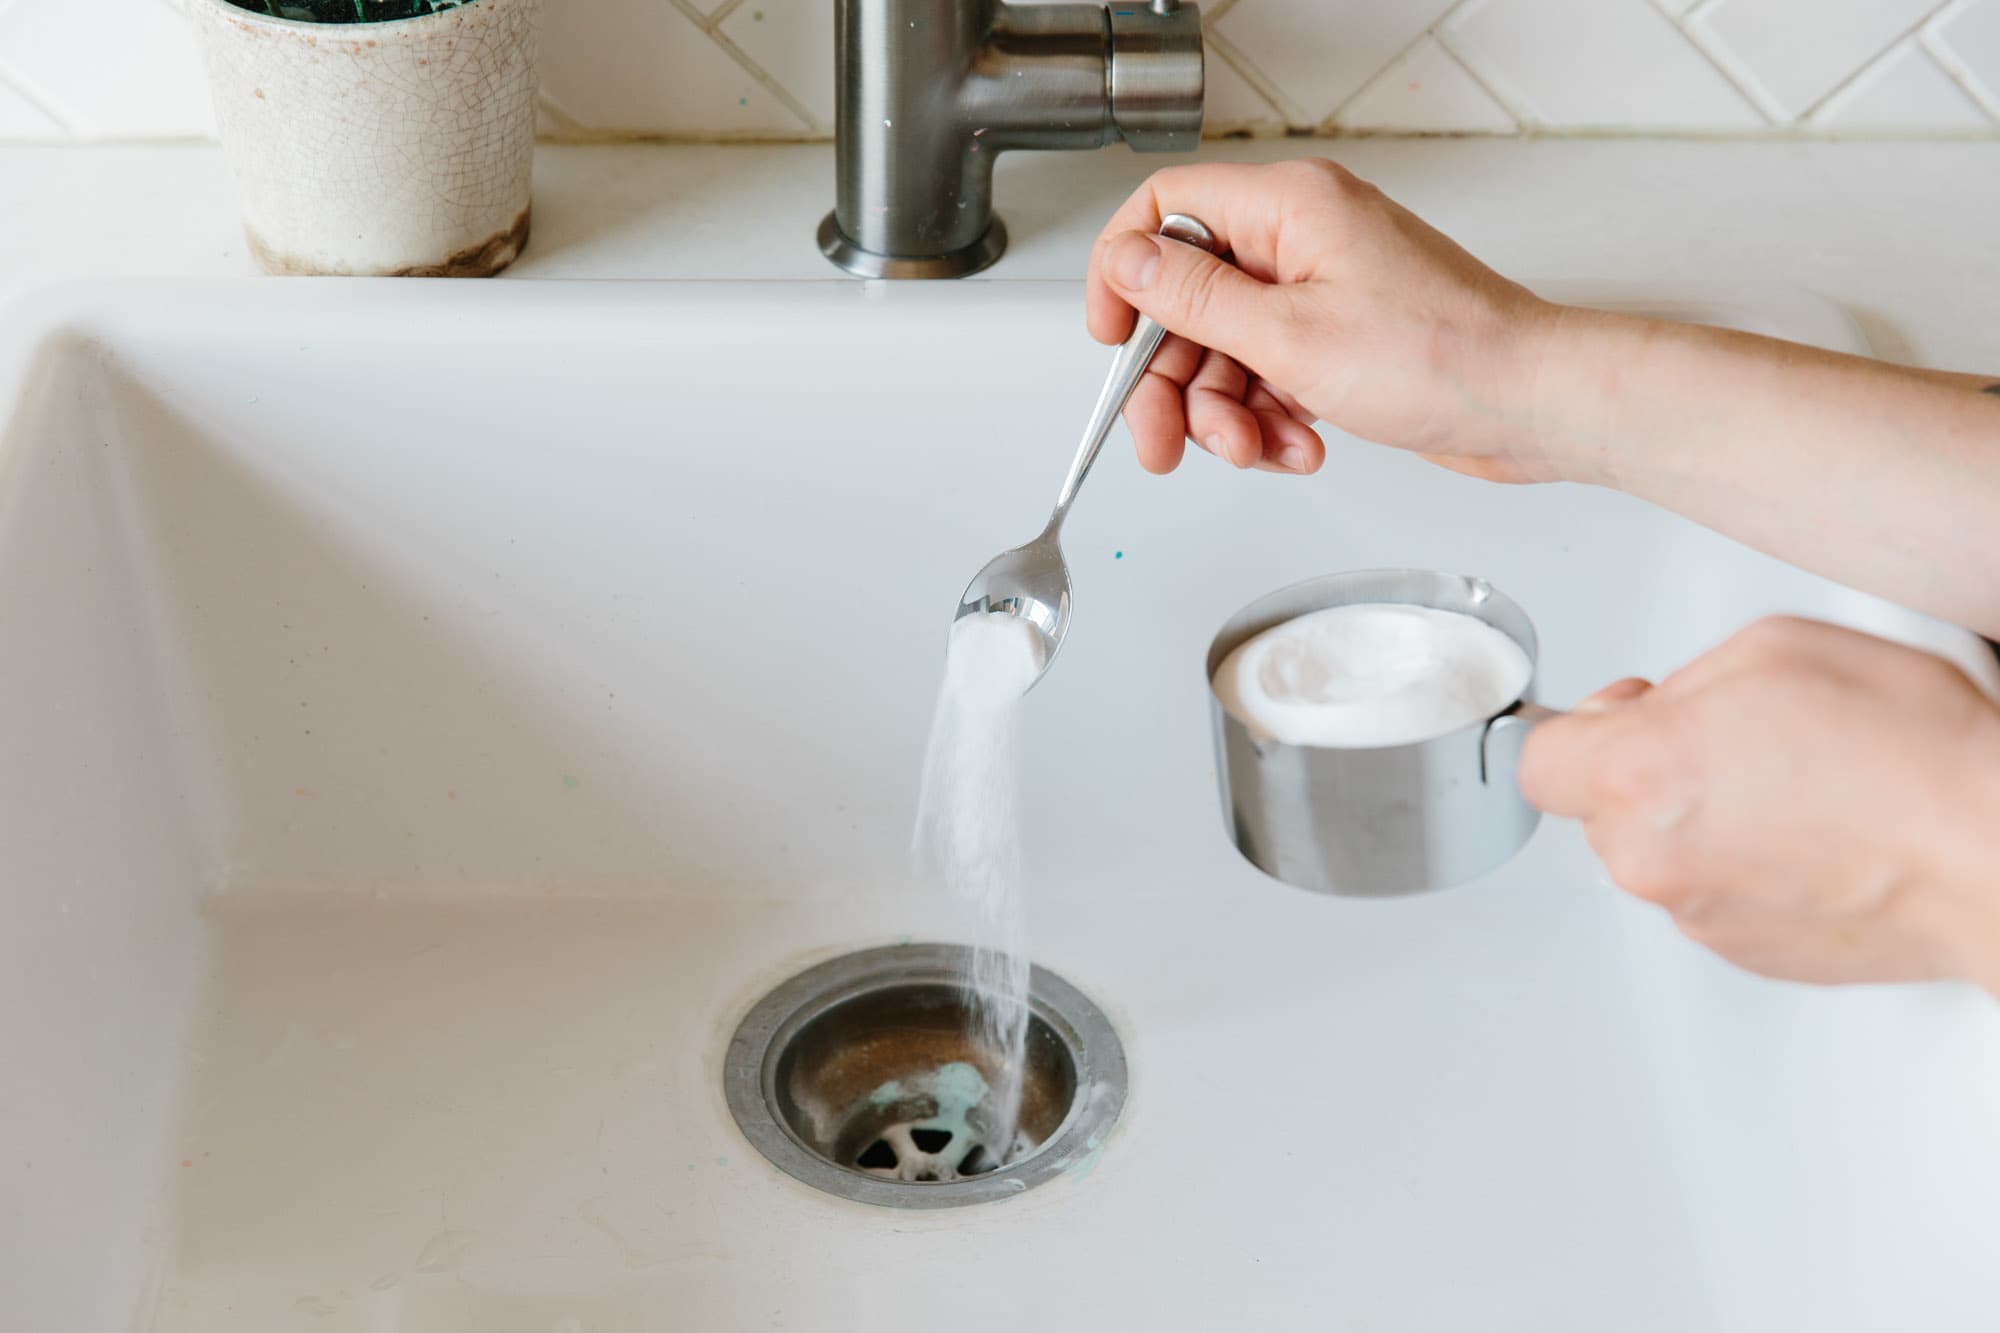 how to get rid of a stinky kitchen sink drain